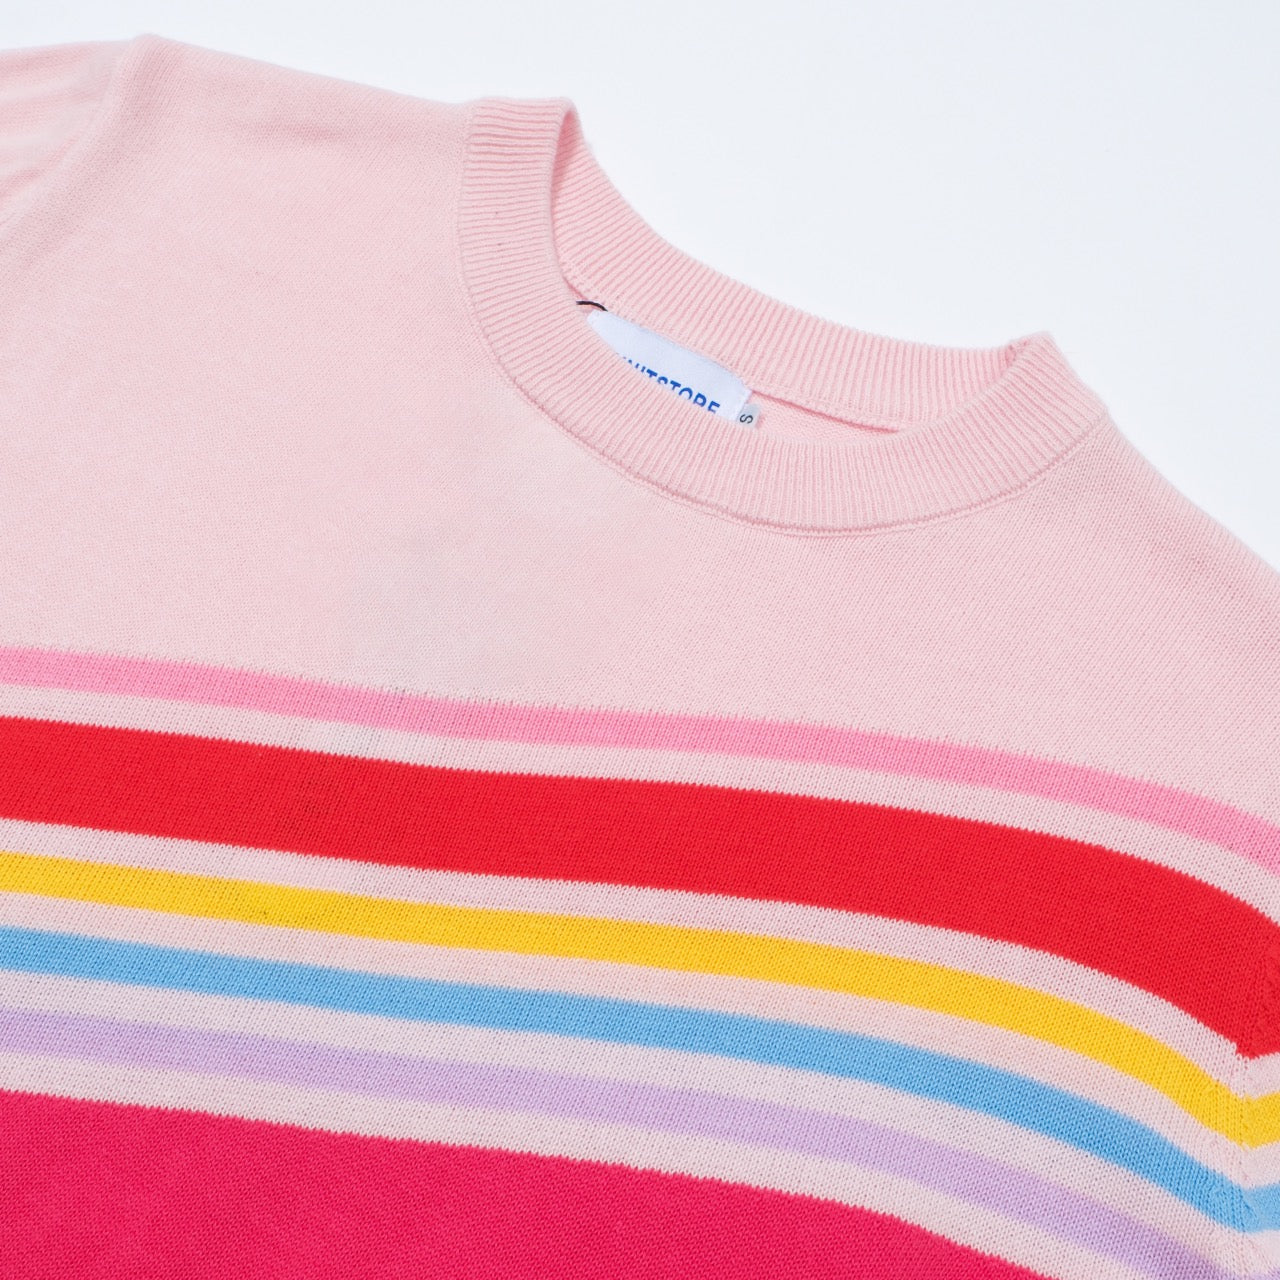 OXKNIT Women Vintage Clothing 1970s Mod Style Casual Long Sleeve Pink Rainbow Striped Knit Retro T-shirts